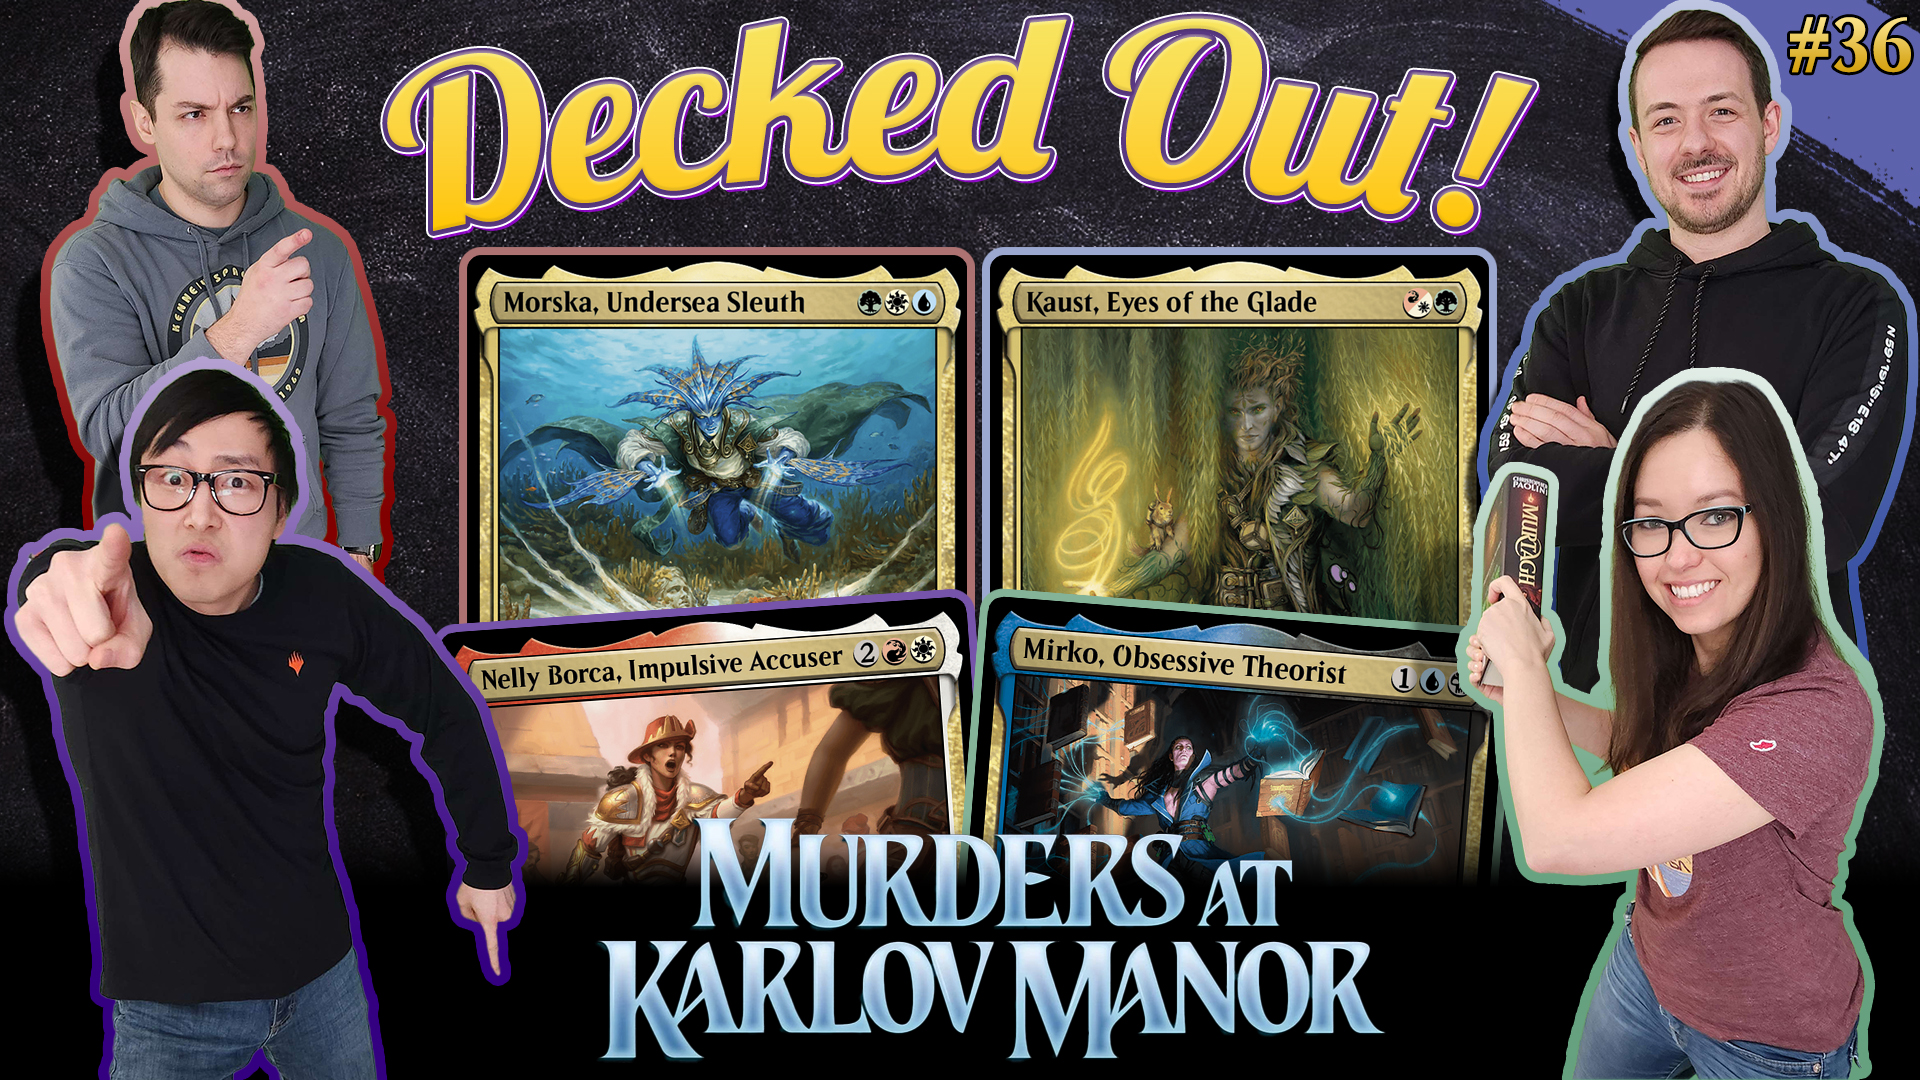 Murders At Karlov Manor Decked Out!